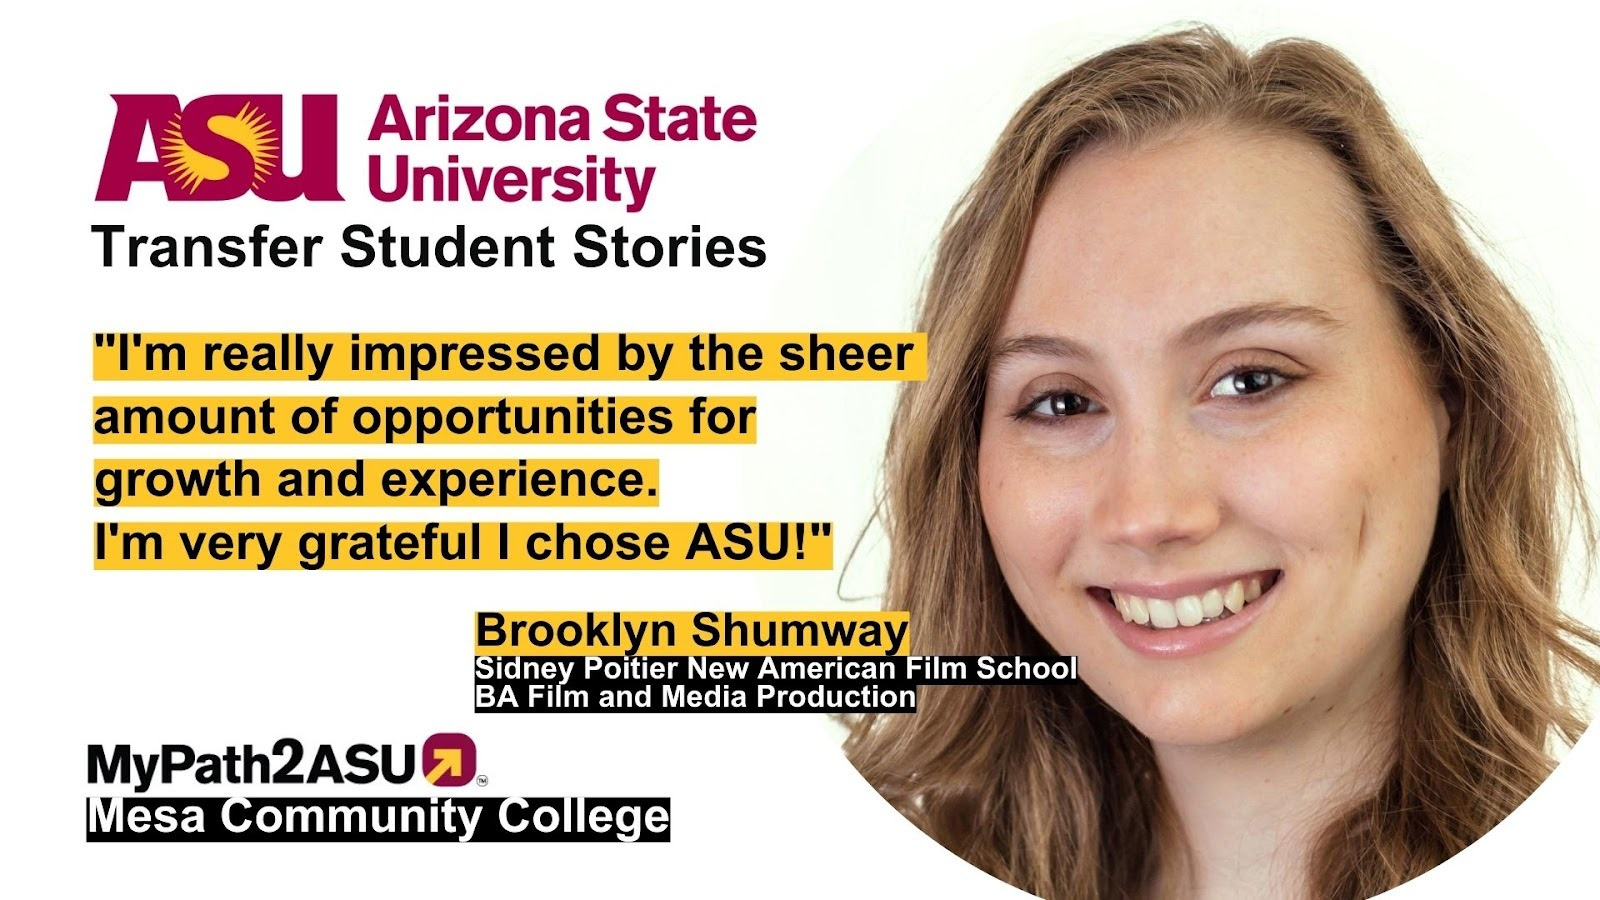 Transfer Student Story Graphic feat Brooklyn Shumway w/ quote about ASU